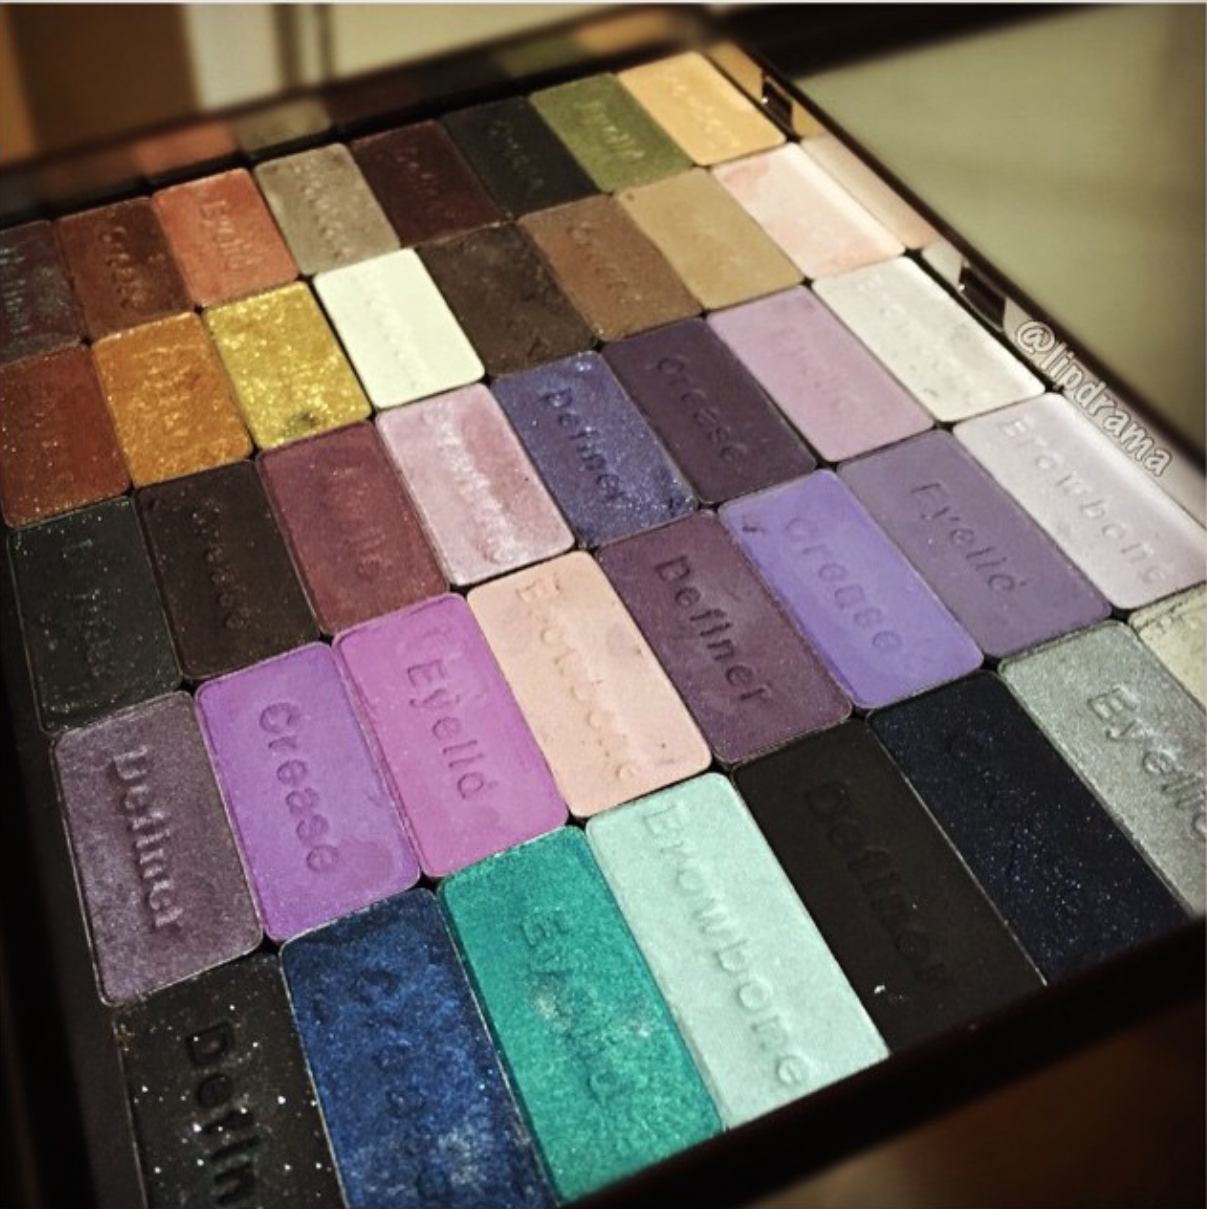 How do you store Depotted eyeshadow?, What does it mean to Depot makeup?, TinyProKit